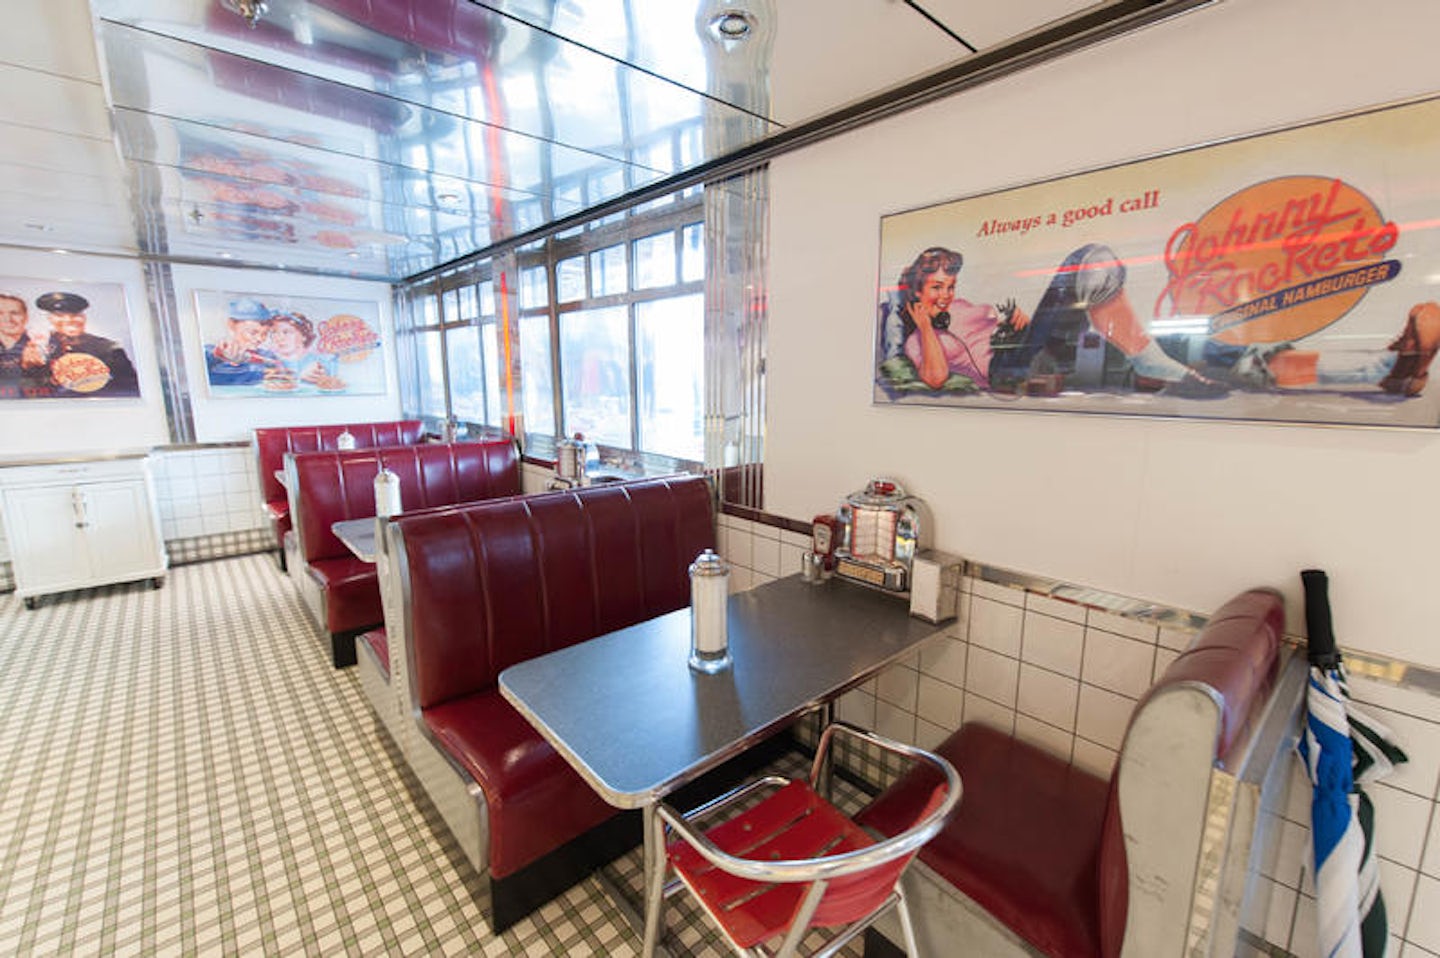 Johnny Rockets on Allure of the Seas